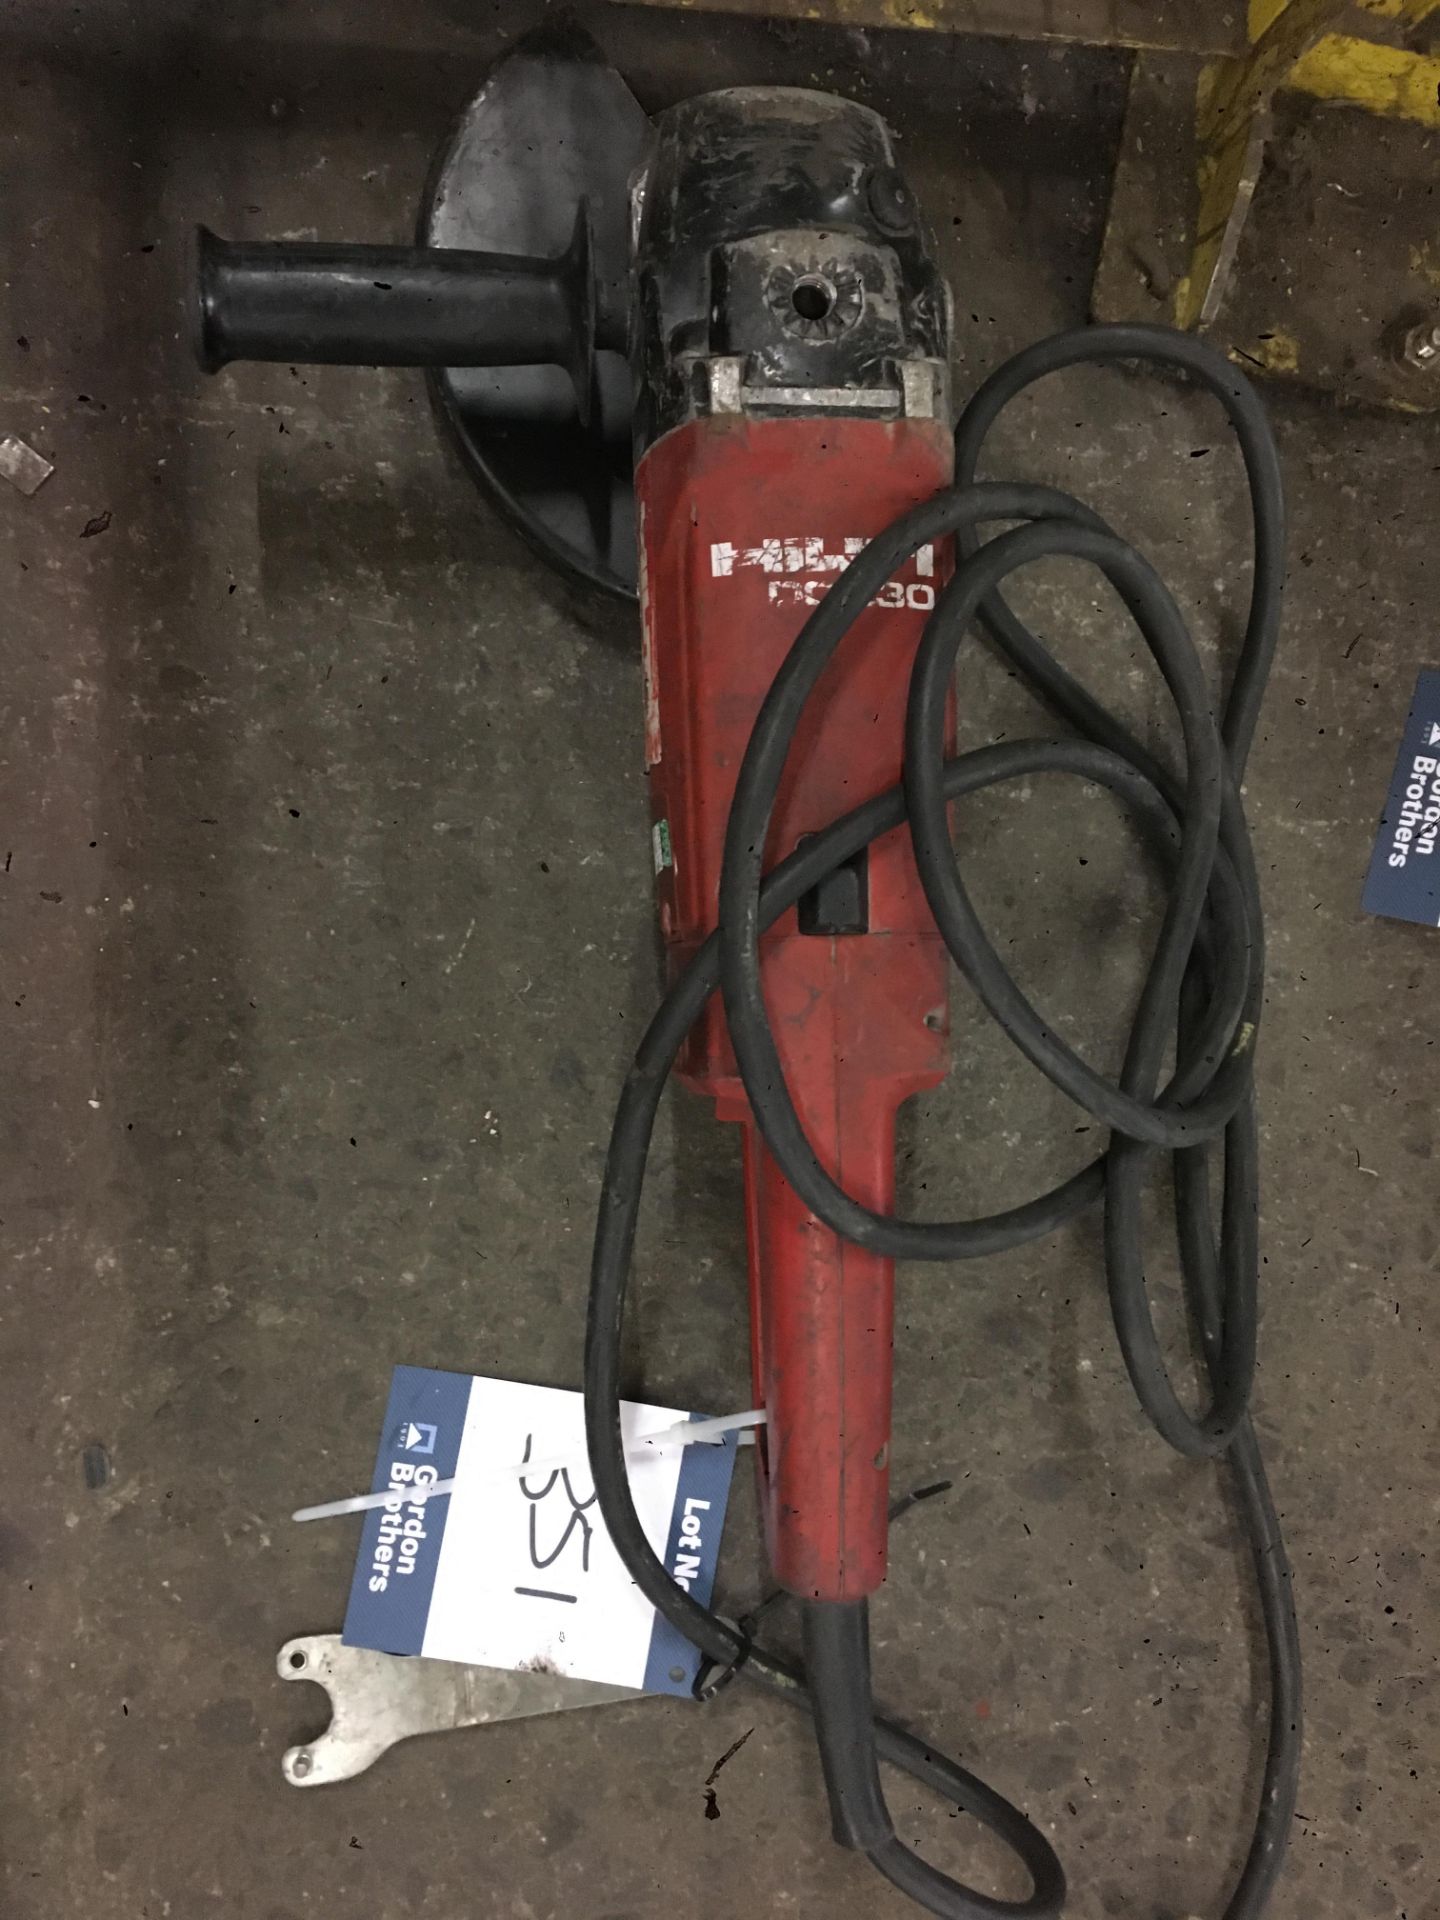 Hilti DC230 12" angle grinder, 110v **This lot is located at The Willows Site, CF48 1YH**